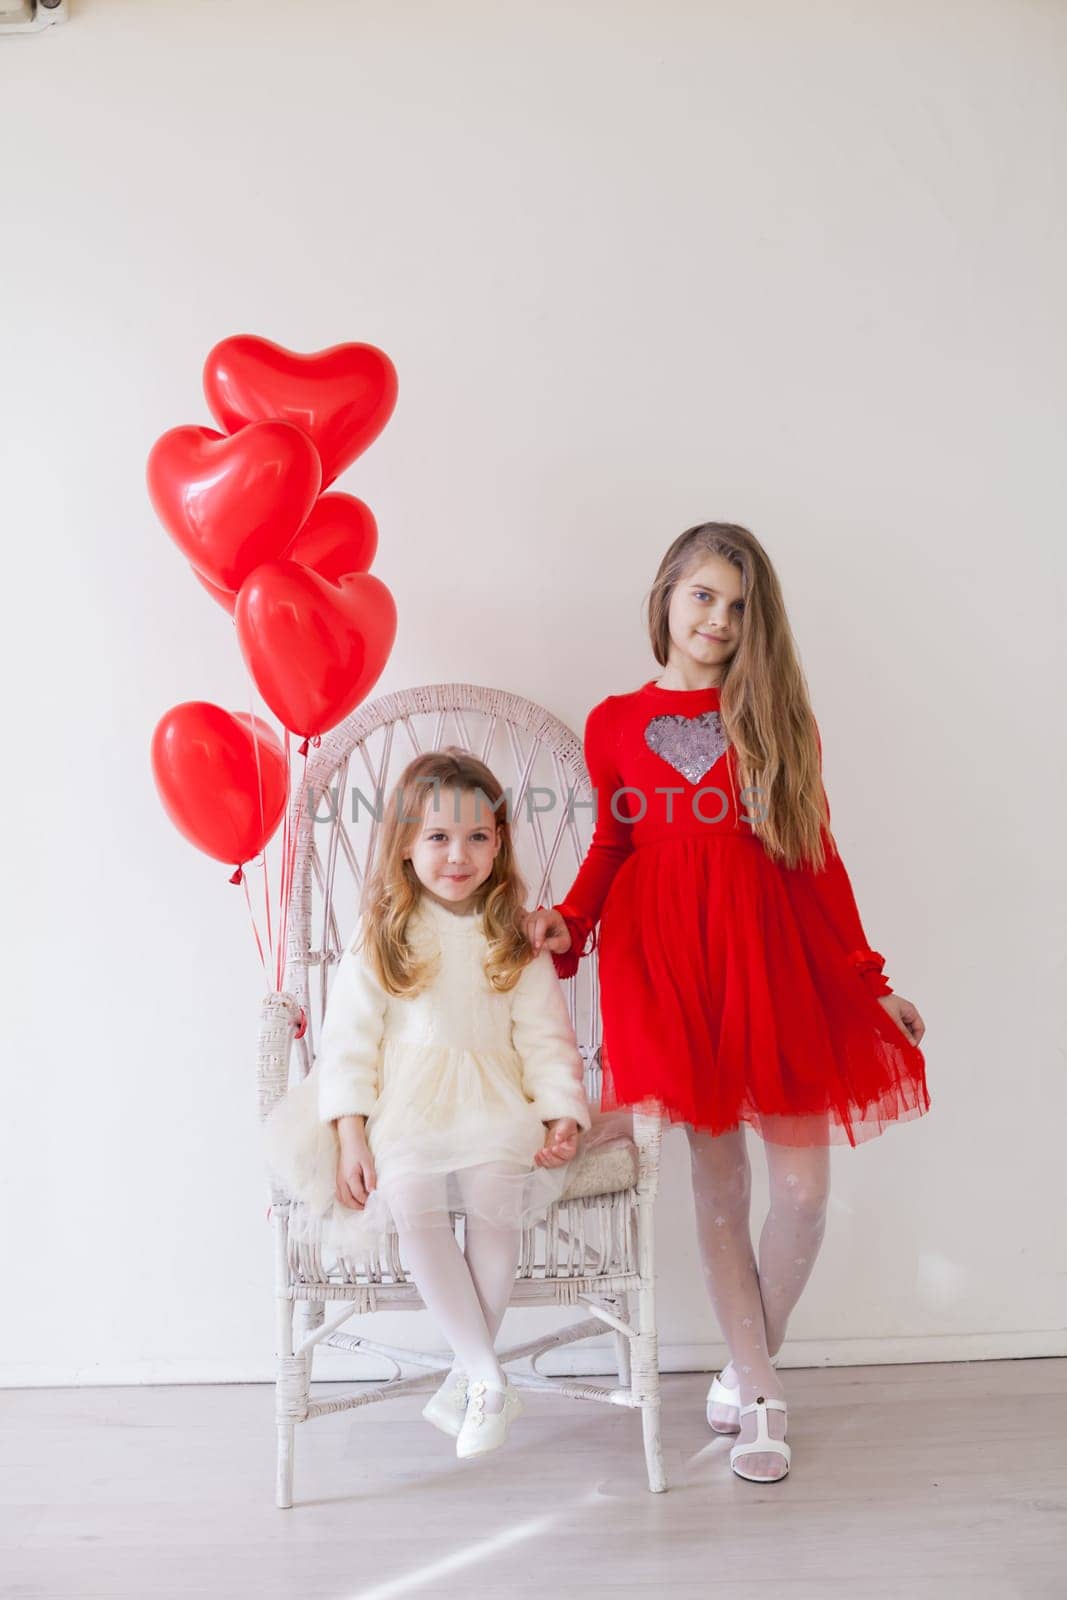 Two girls with red heart-shaped balloons on Valentine's Day celebrations by Simakov